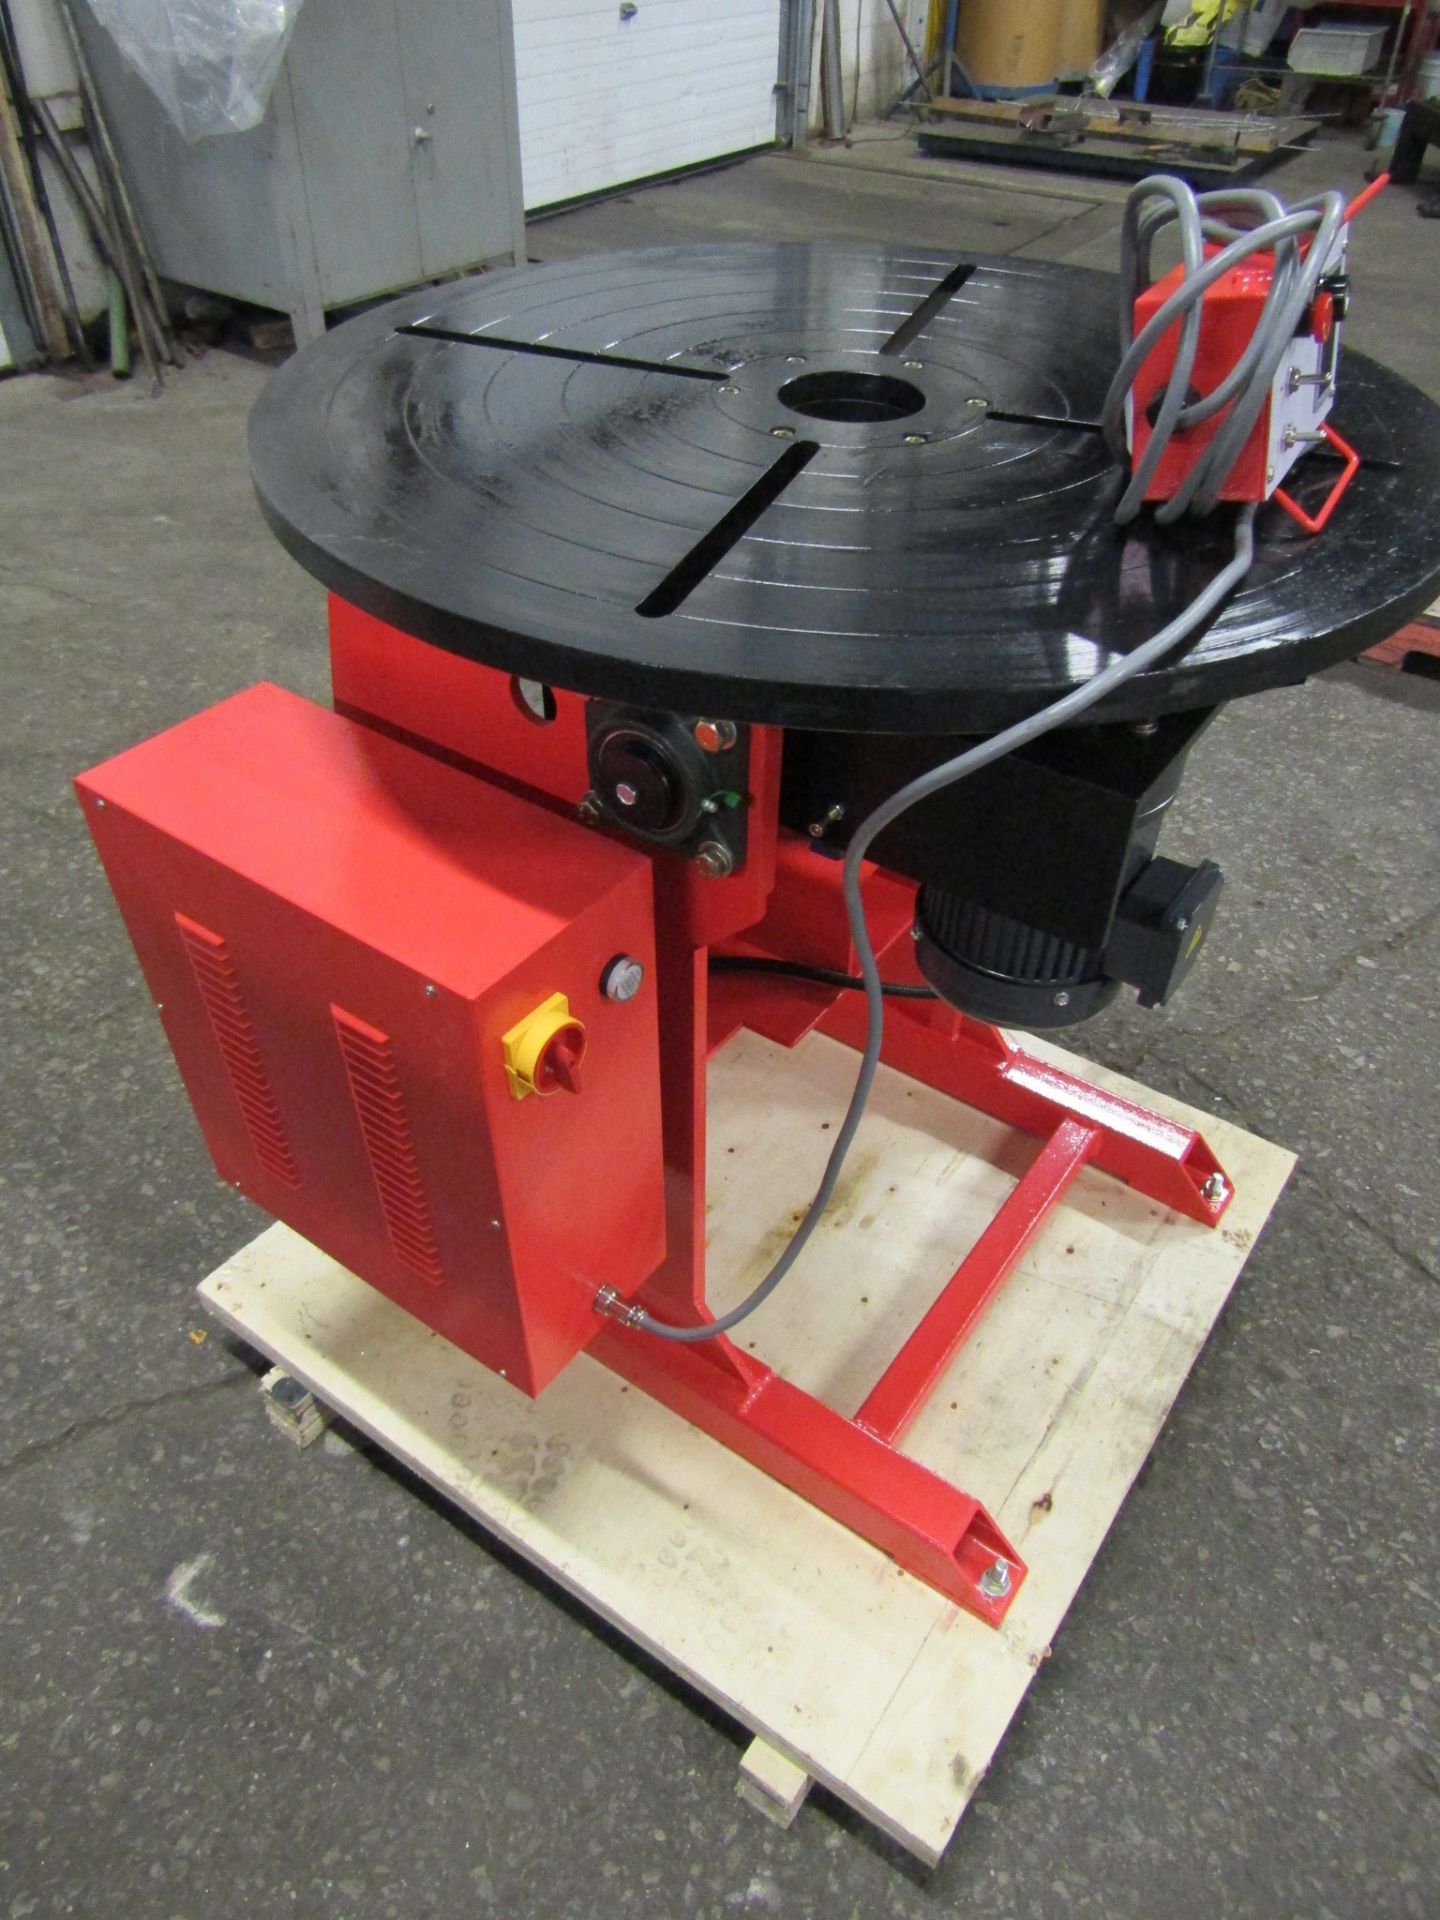 Verner model VD-1500 WELDING POSITIONER 1500lbs capacity - tilt and rotate with variable speed drive - Image 2 of 2